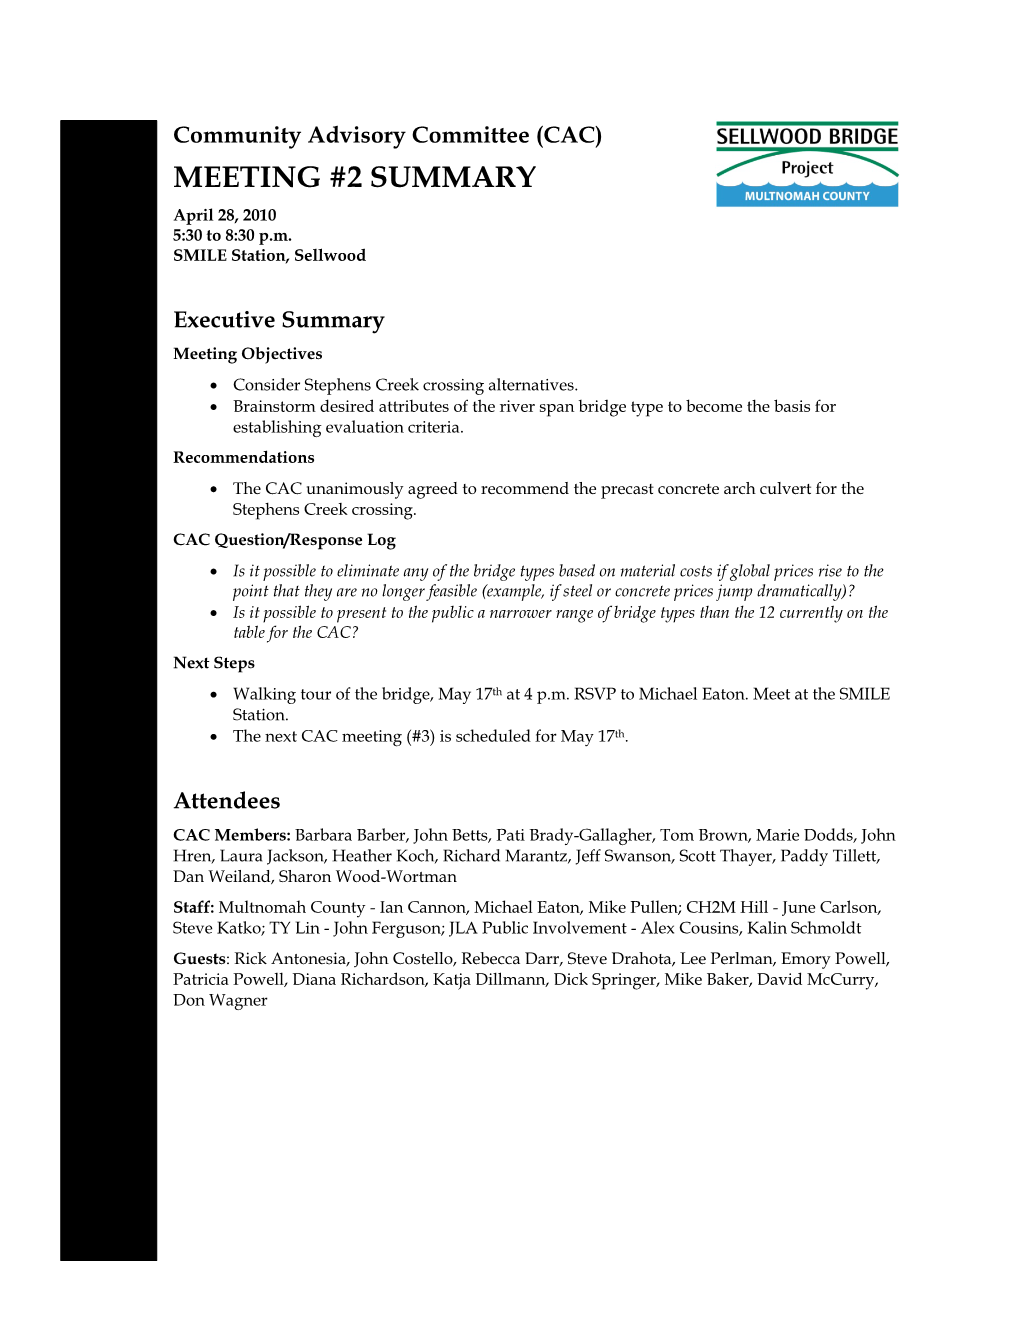 MEETING #2 SUMMARY April 28, 2010 5:30 to 8:30 P.M